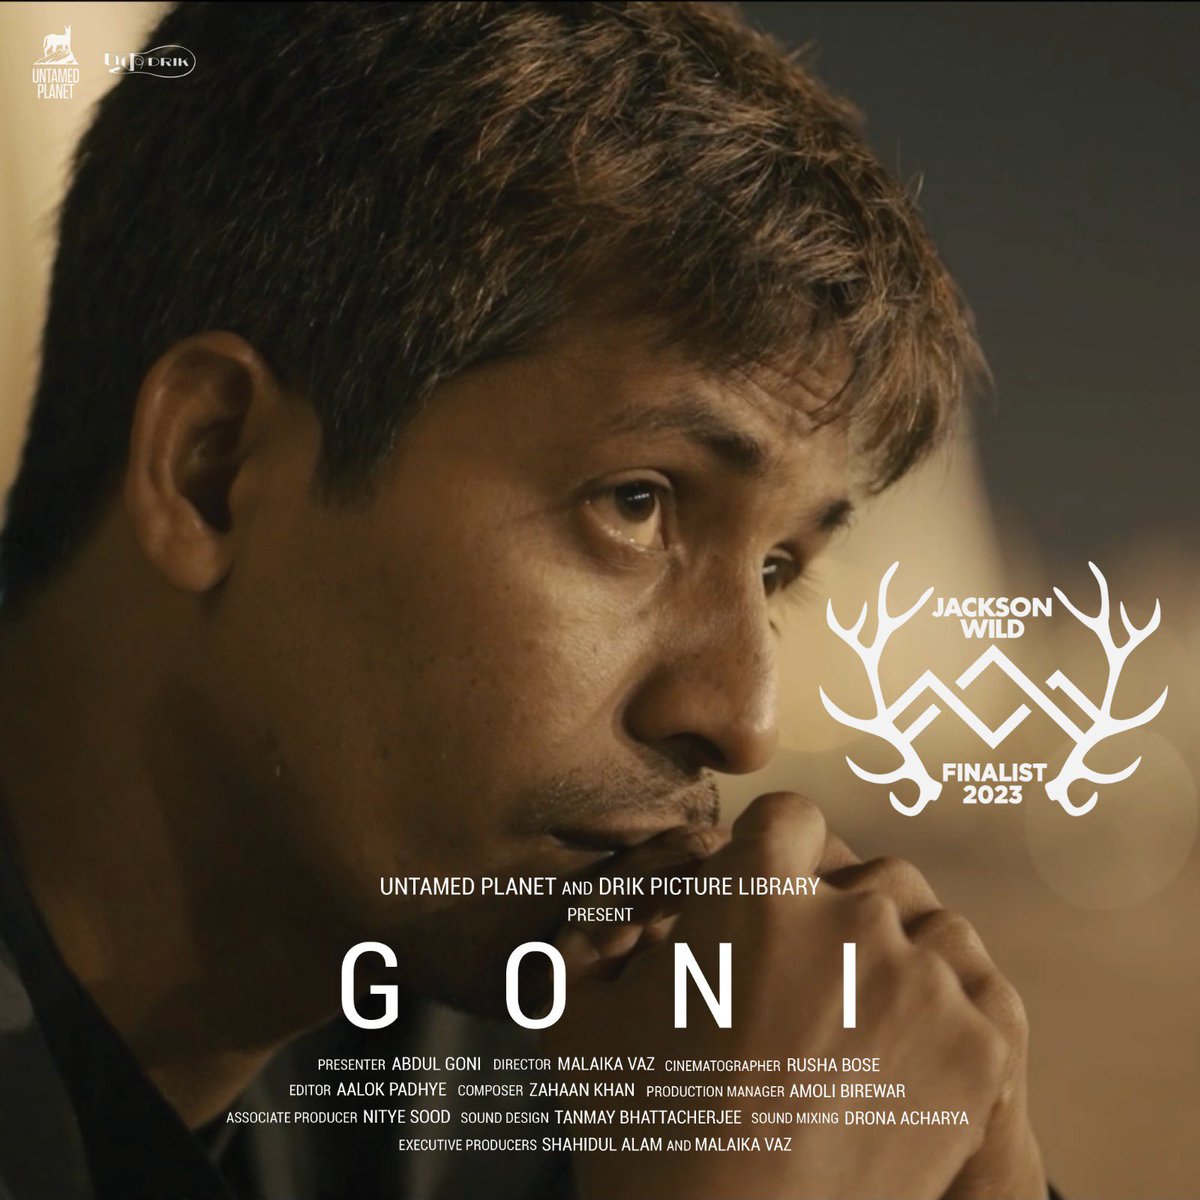 Our film GONI is a finalist at this years @JacksonWild festival!

Had the privilege of editing this powerful story directed by Malaika Vaz and produced by Untamed Planet Films and @drikimages 

@tanmaysound @maybedrona @shahidul @nityesood #Documentary #festival #finalist #Editor